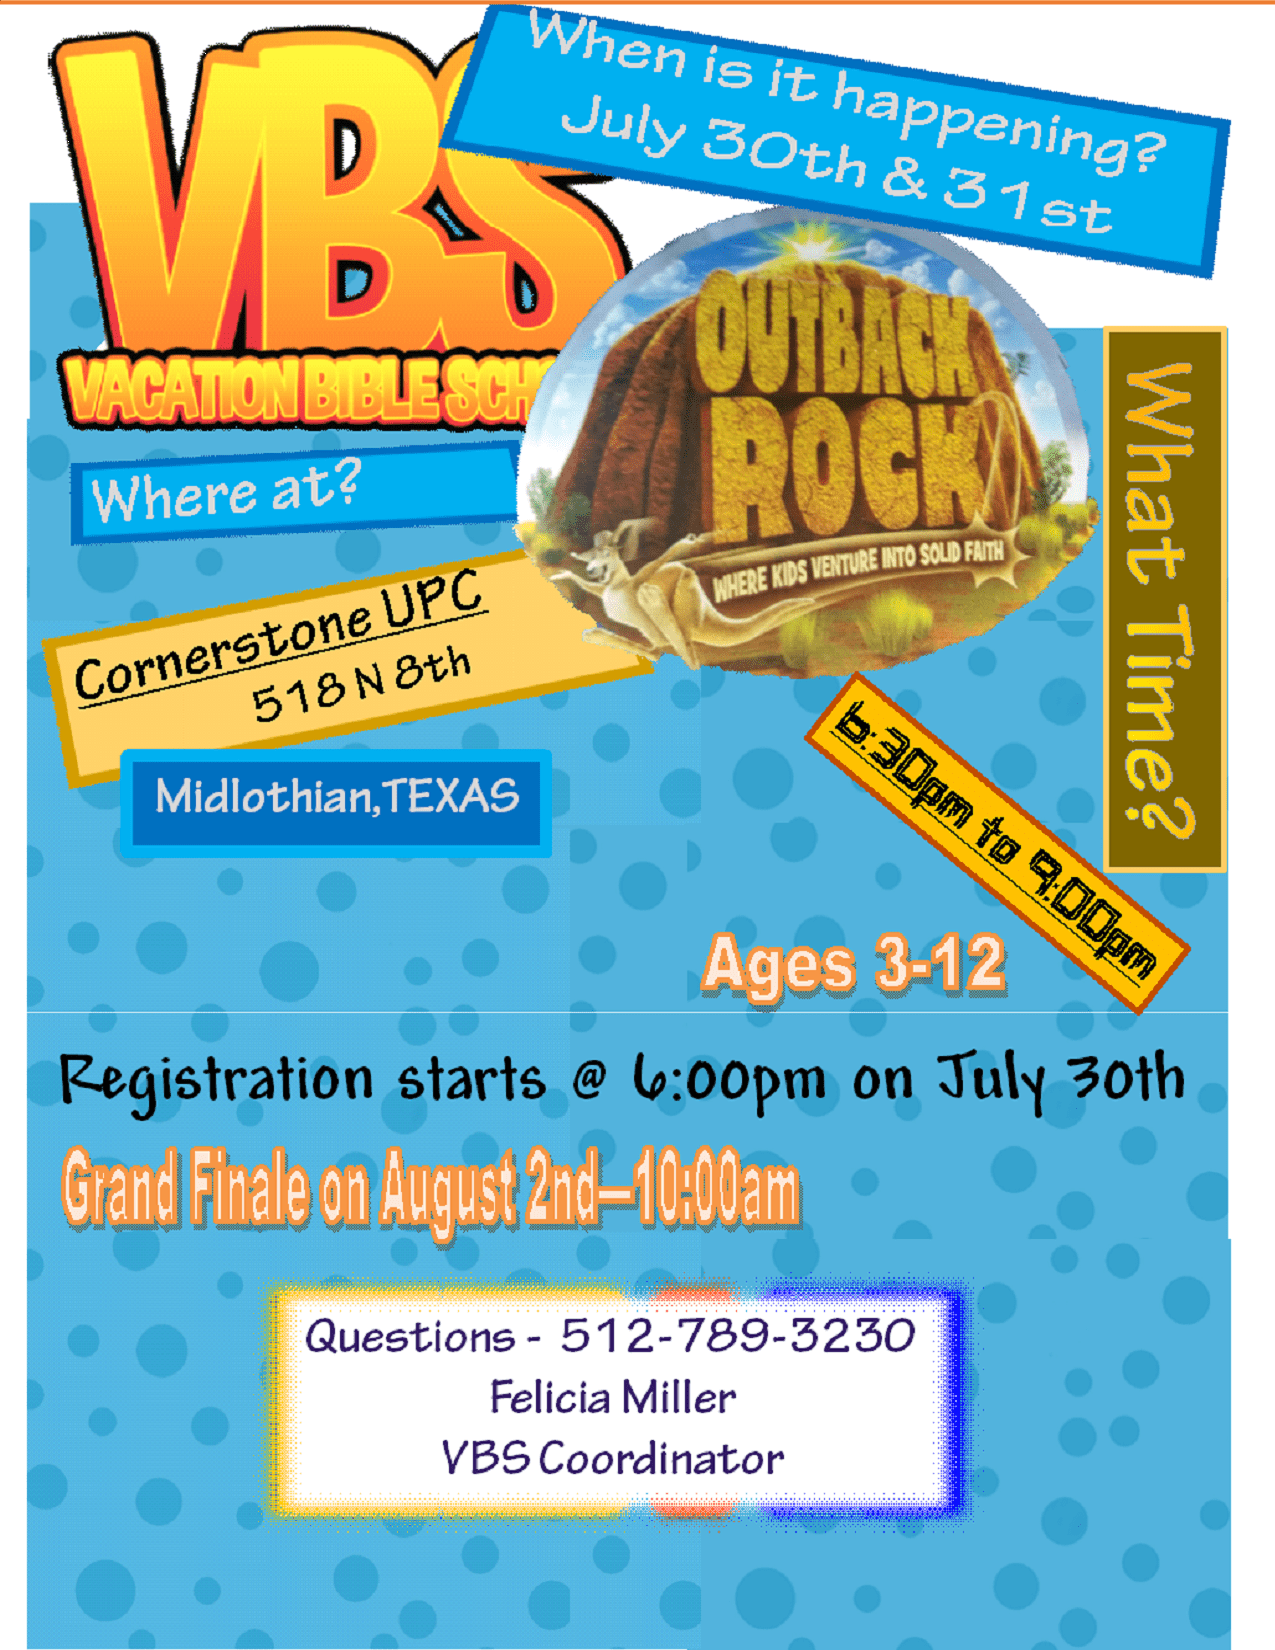 Outback Rock Vbs - Outback Rock Vbs, Transparent background PNG HD thumbnail